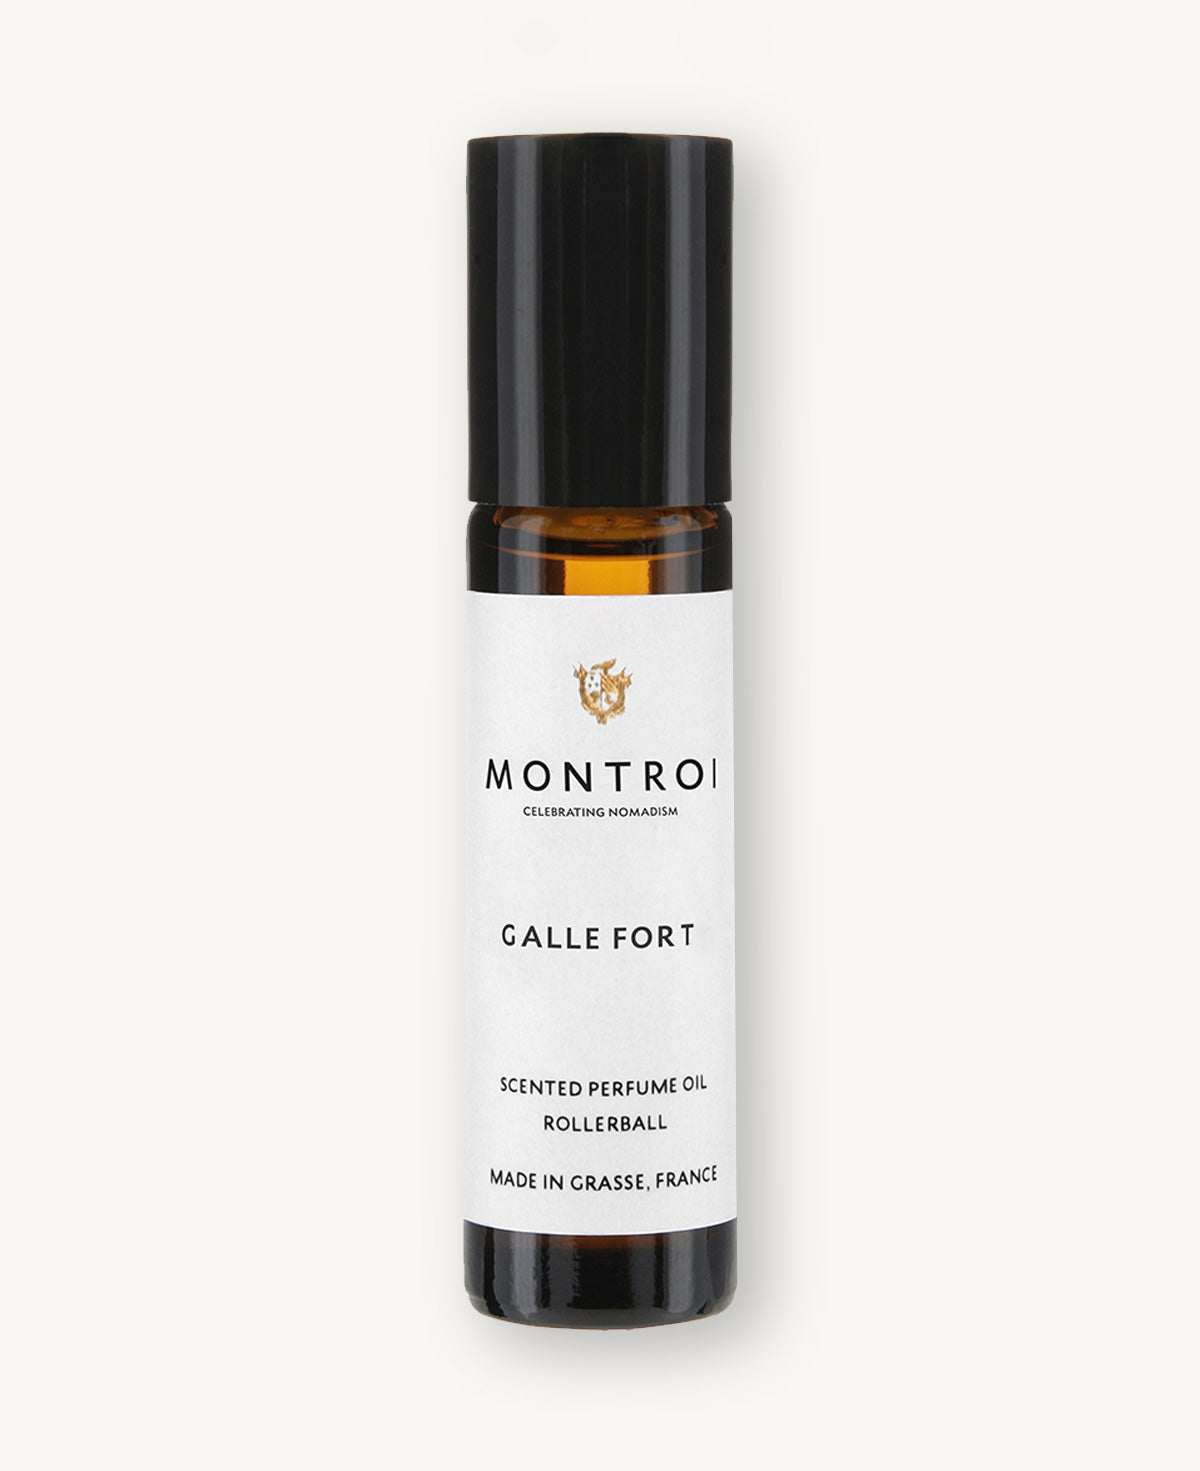 GALLE FORT PERFUME OIL